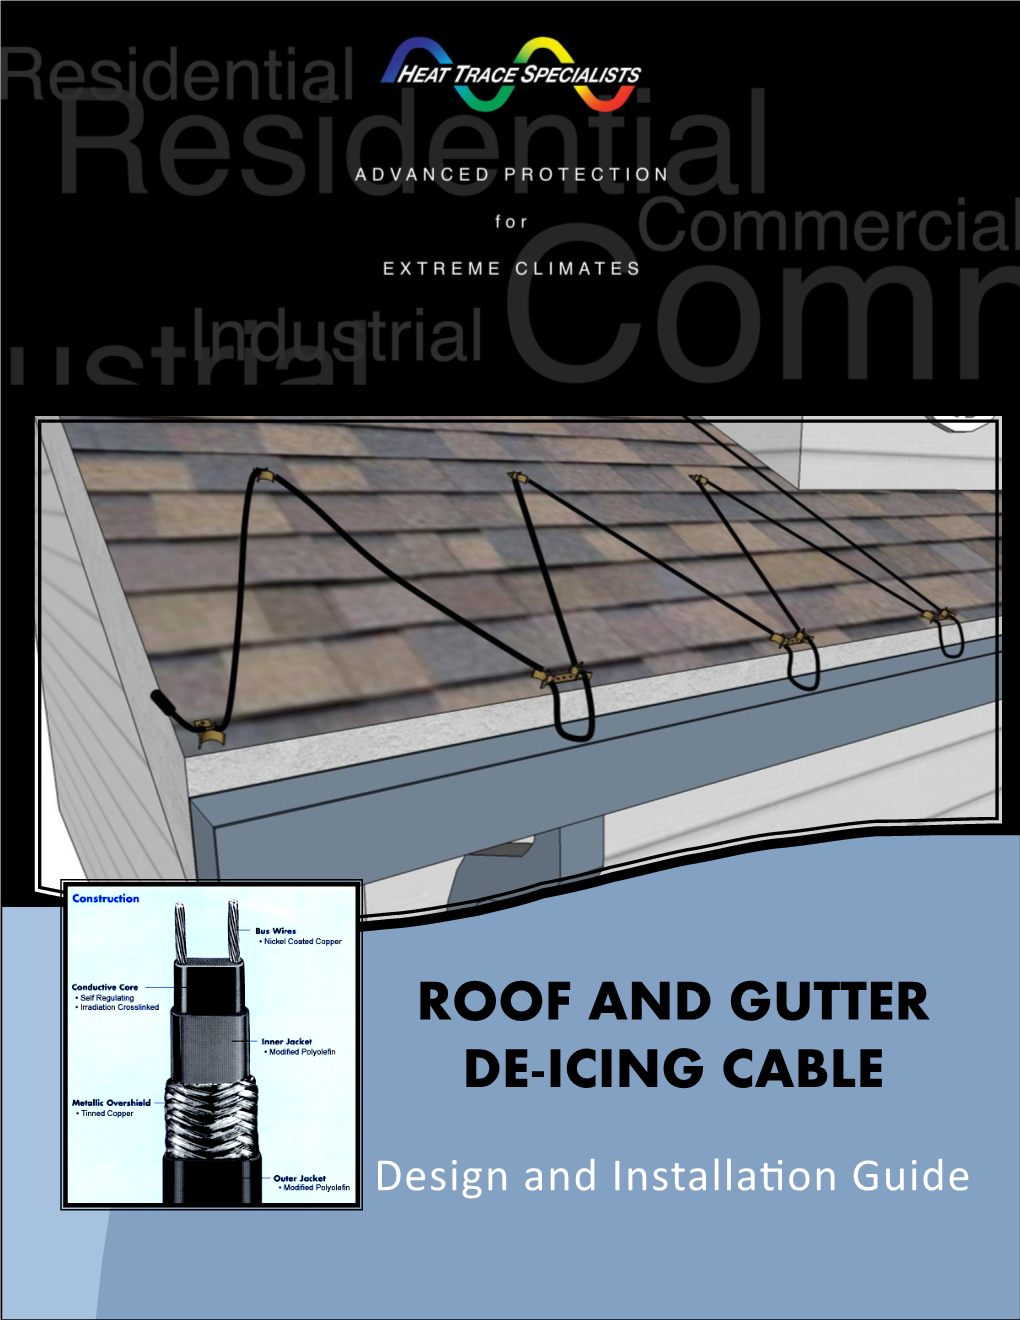 Roof and Gutter De-Icing Cable